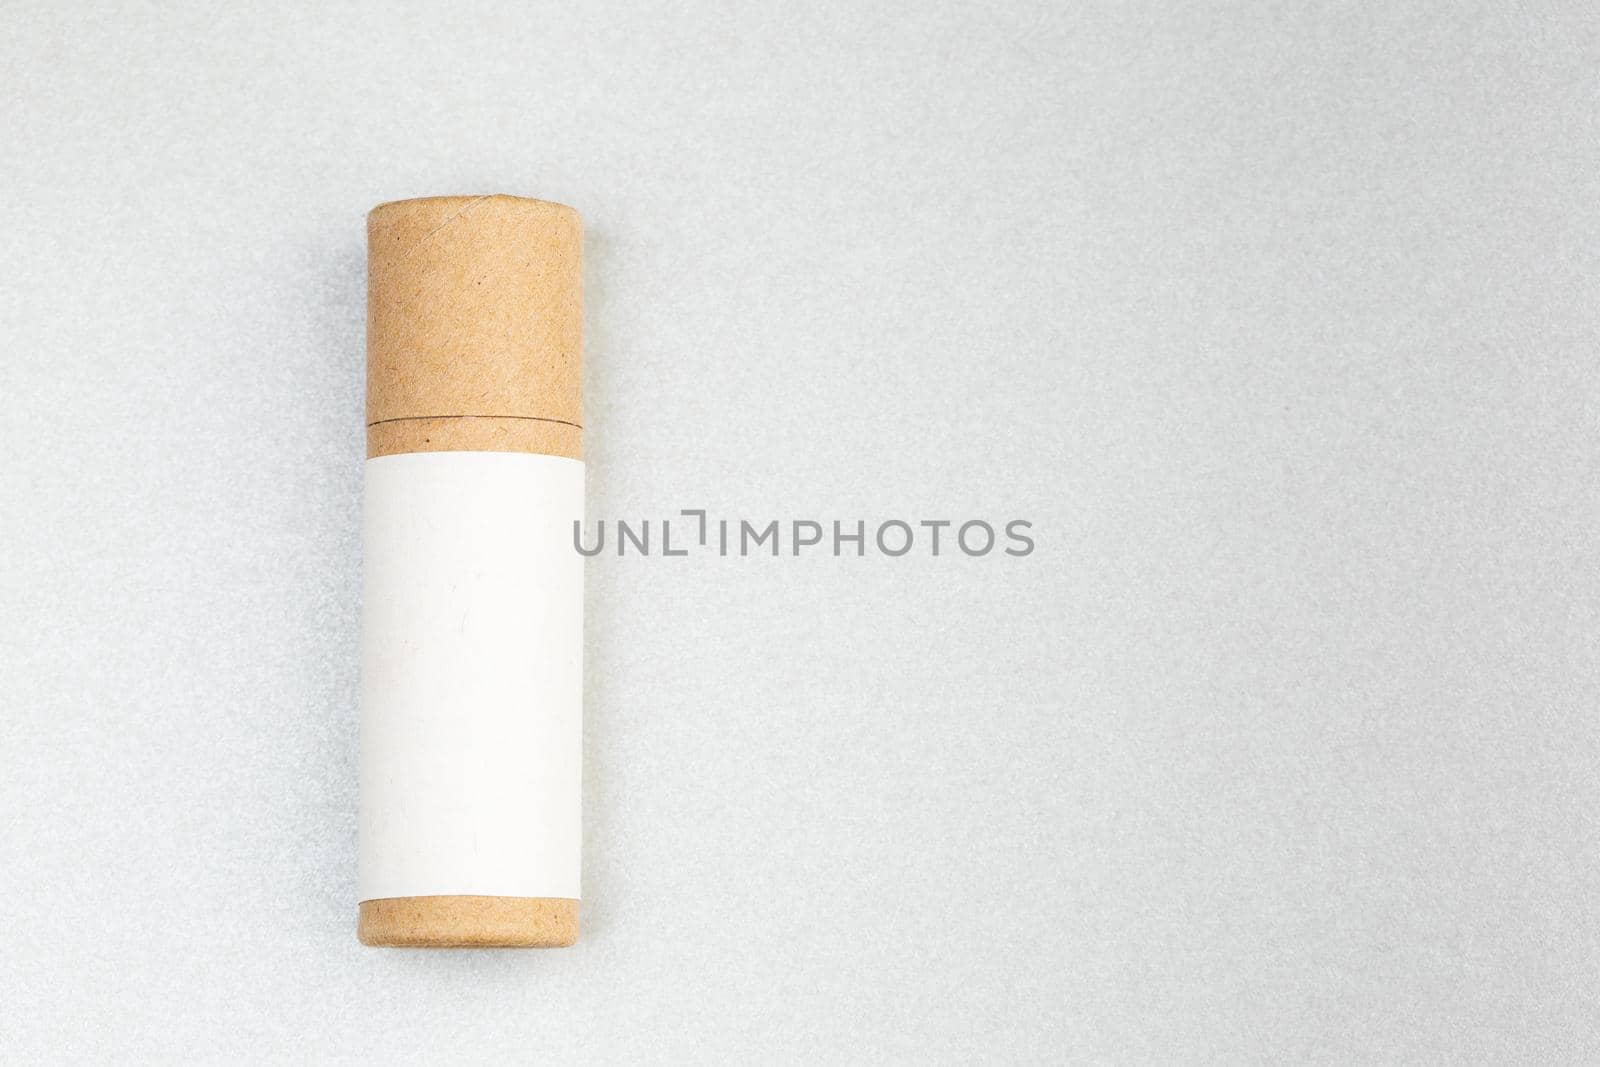 Zero Waste Lipstick packaging. Lip balm tube made of paper. Copy space for text